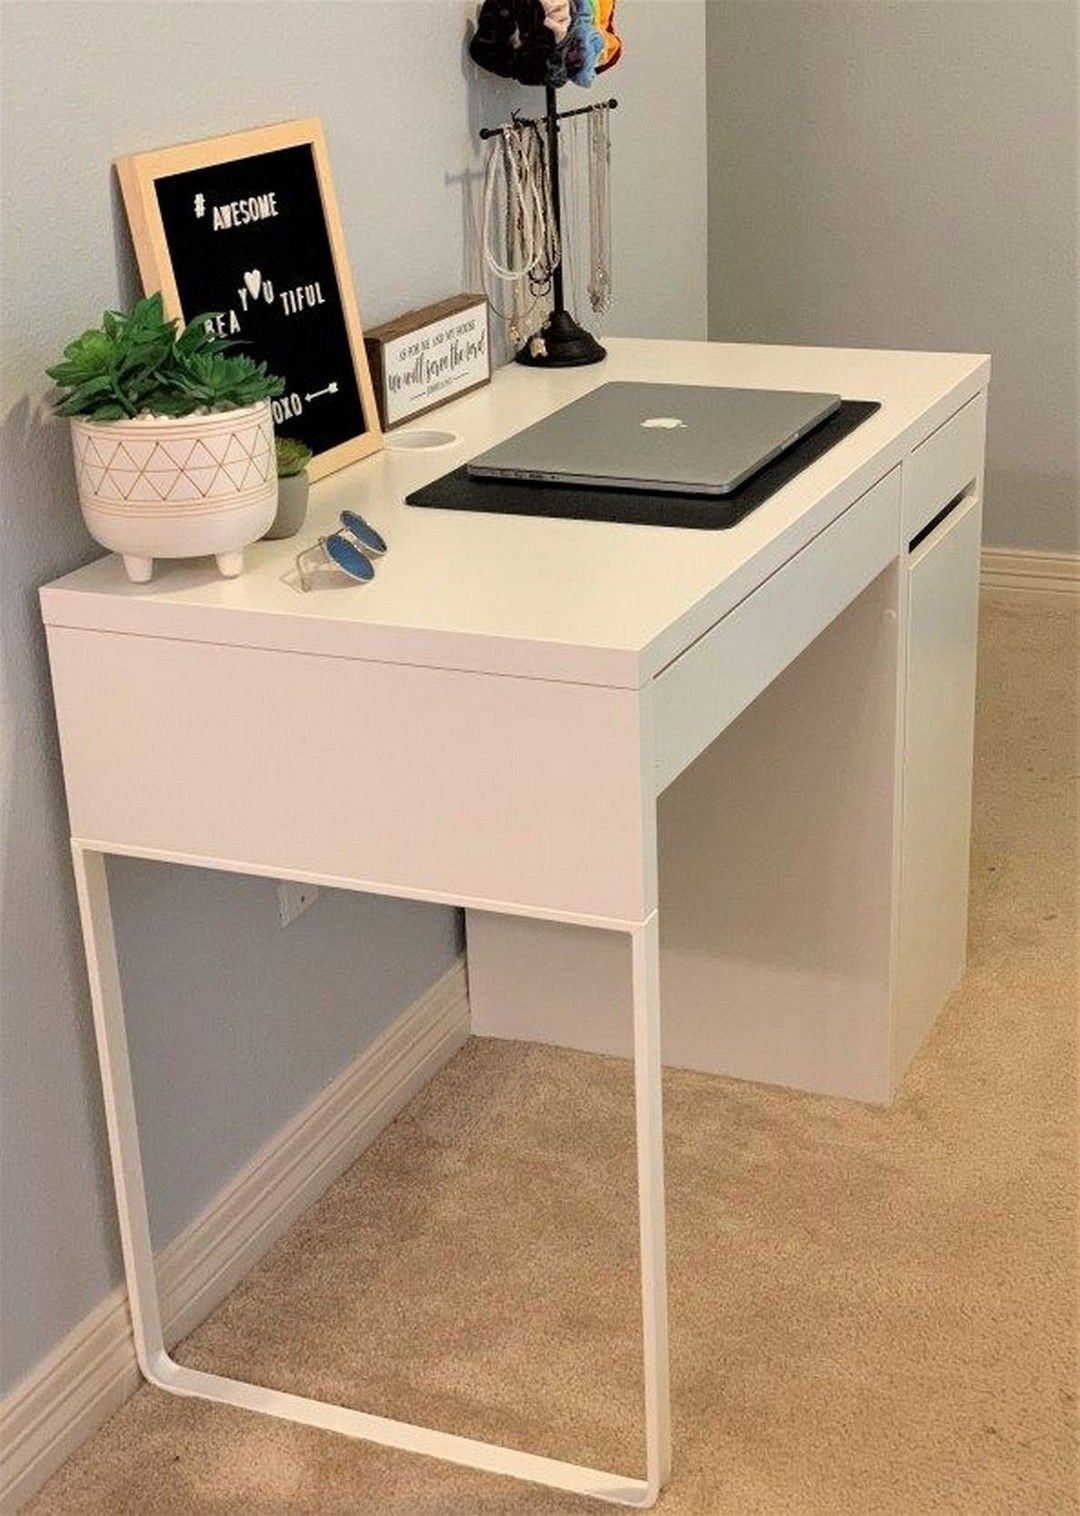 Desk For Small Bedroom
 55 Creative Ways Dream Rooms For Teens Bedrooms Small